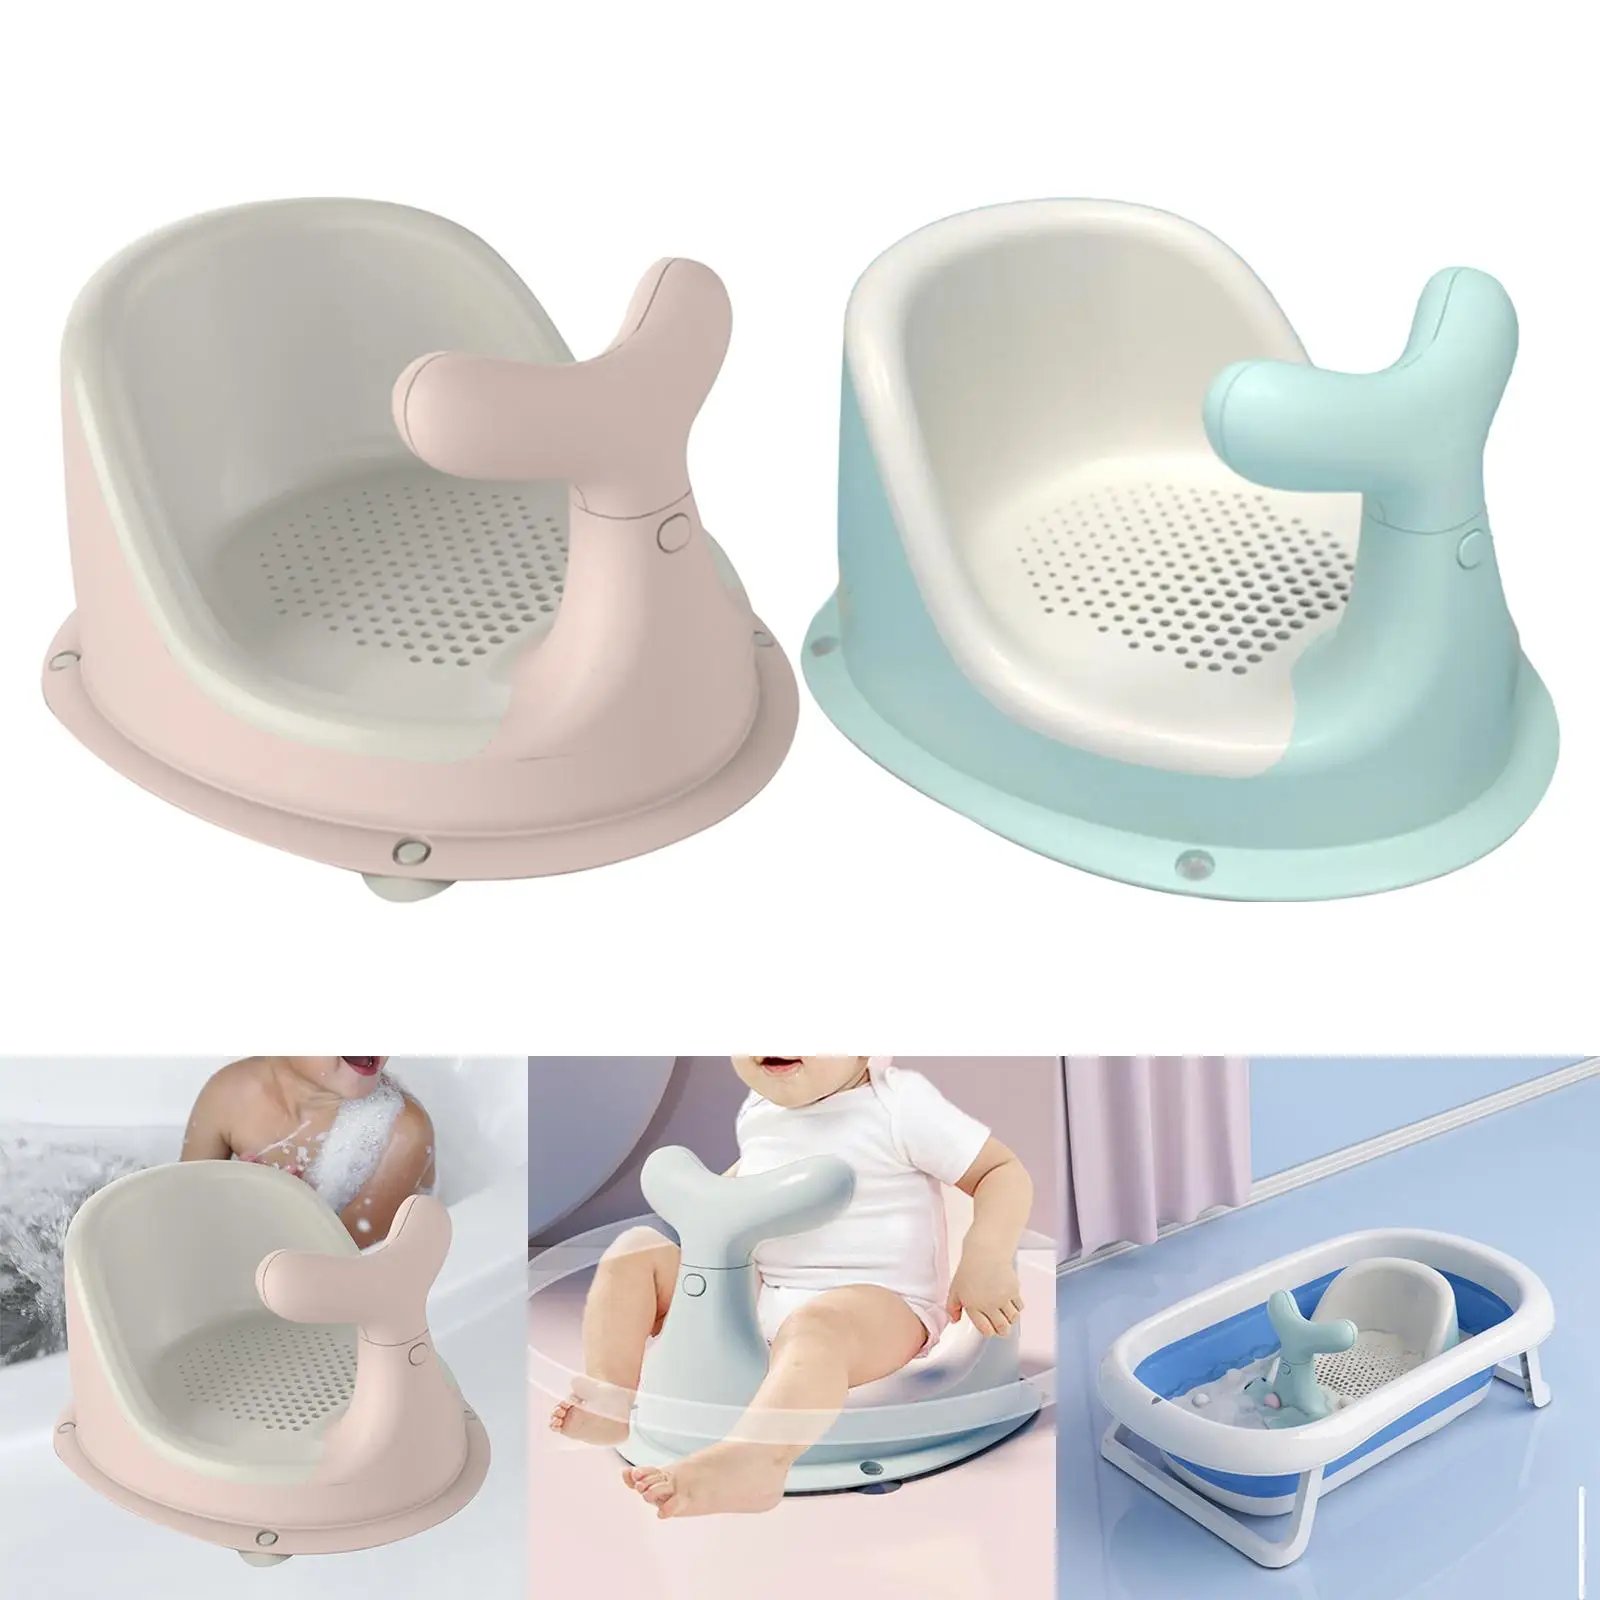 Baby Bath Tub Seat Assisted Sitting Non Slip Soft Mat Sit up for Bathroom